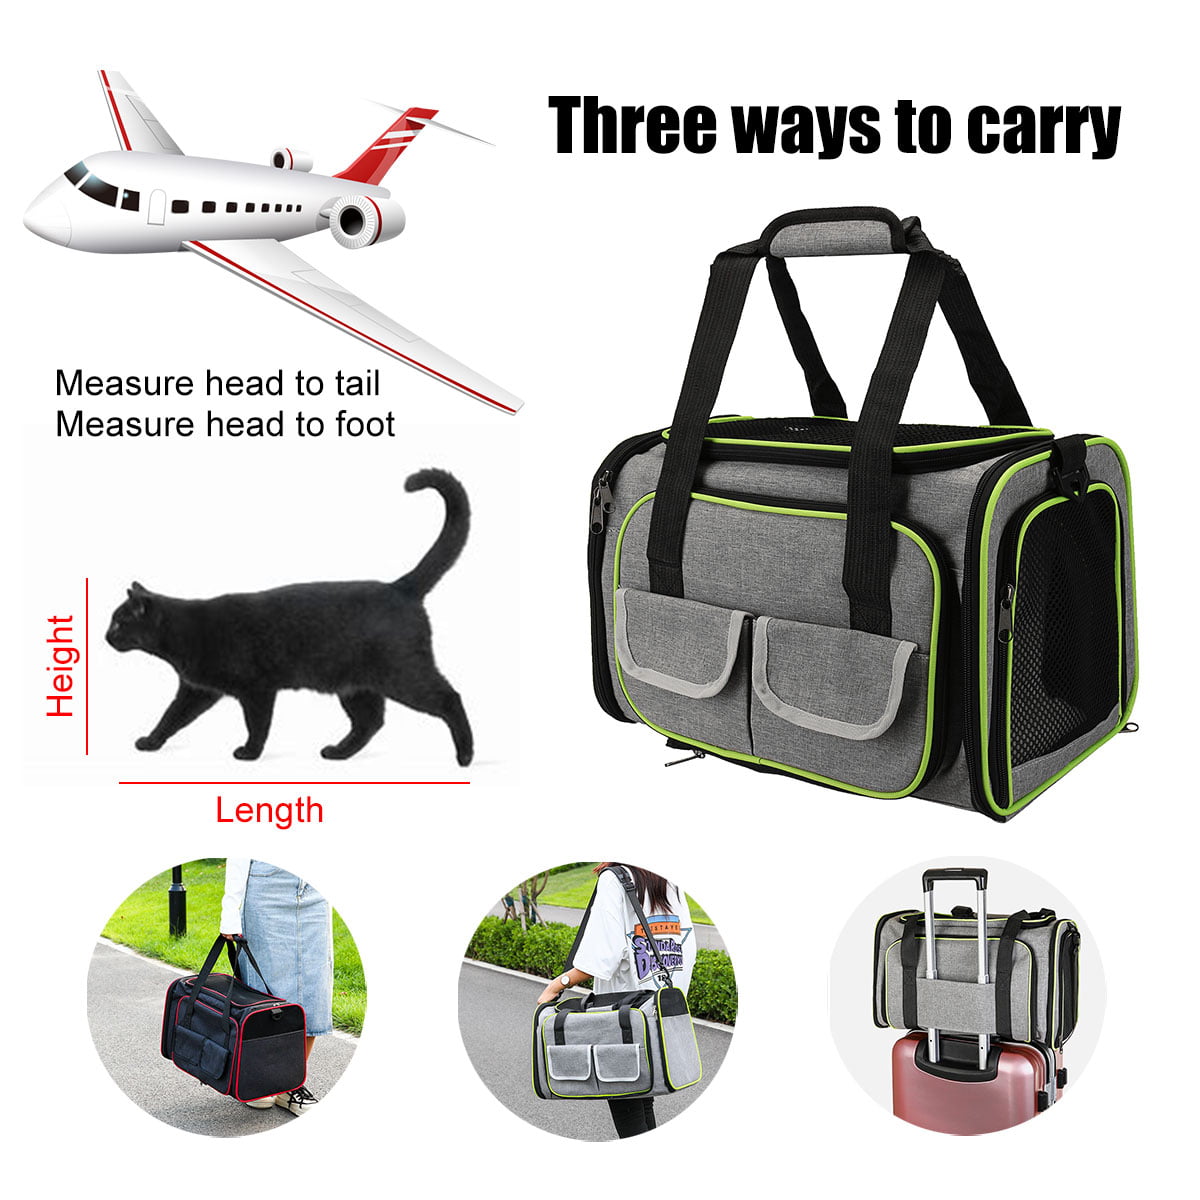 Puppy Sling Carrier Bag for Small Dog,Cat,Reversible Dog Cat Carriers Hands-free Sling Soft and comfortable Fits 6.5KG Puppy kitten Rabbit Pouch Shoulder Carry Tote Handbag